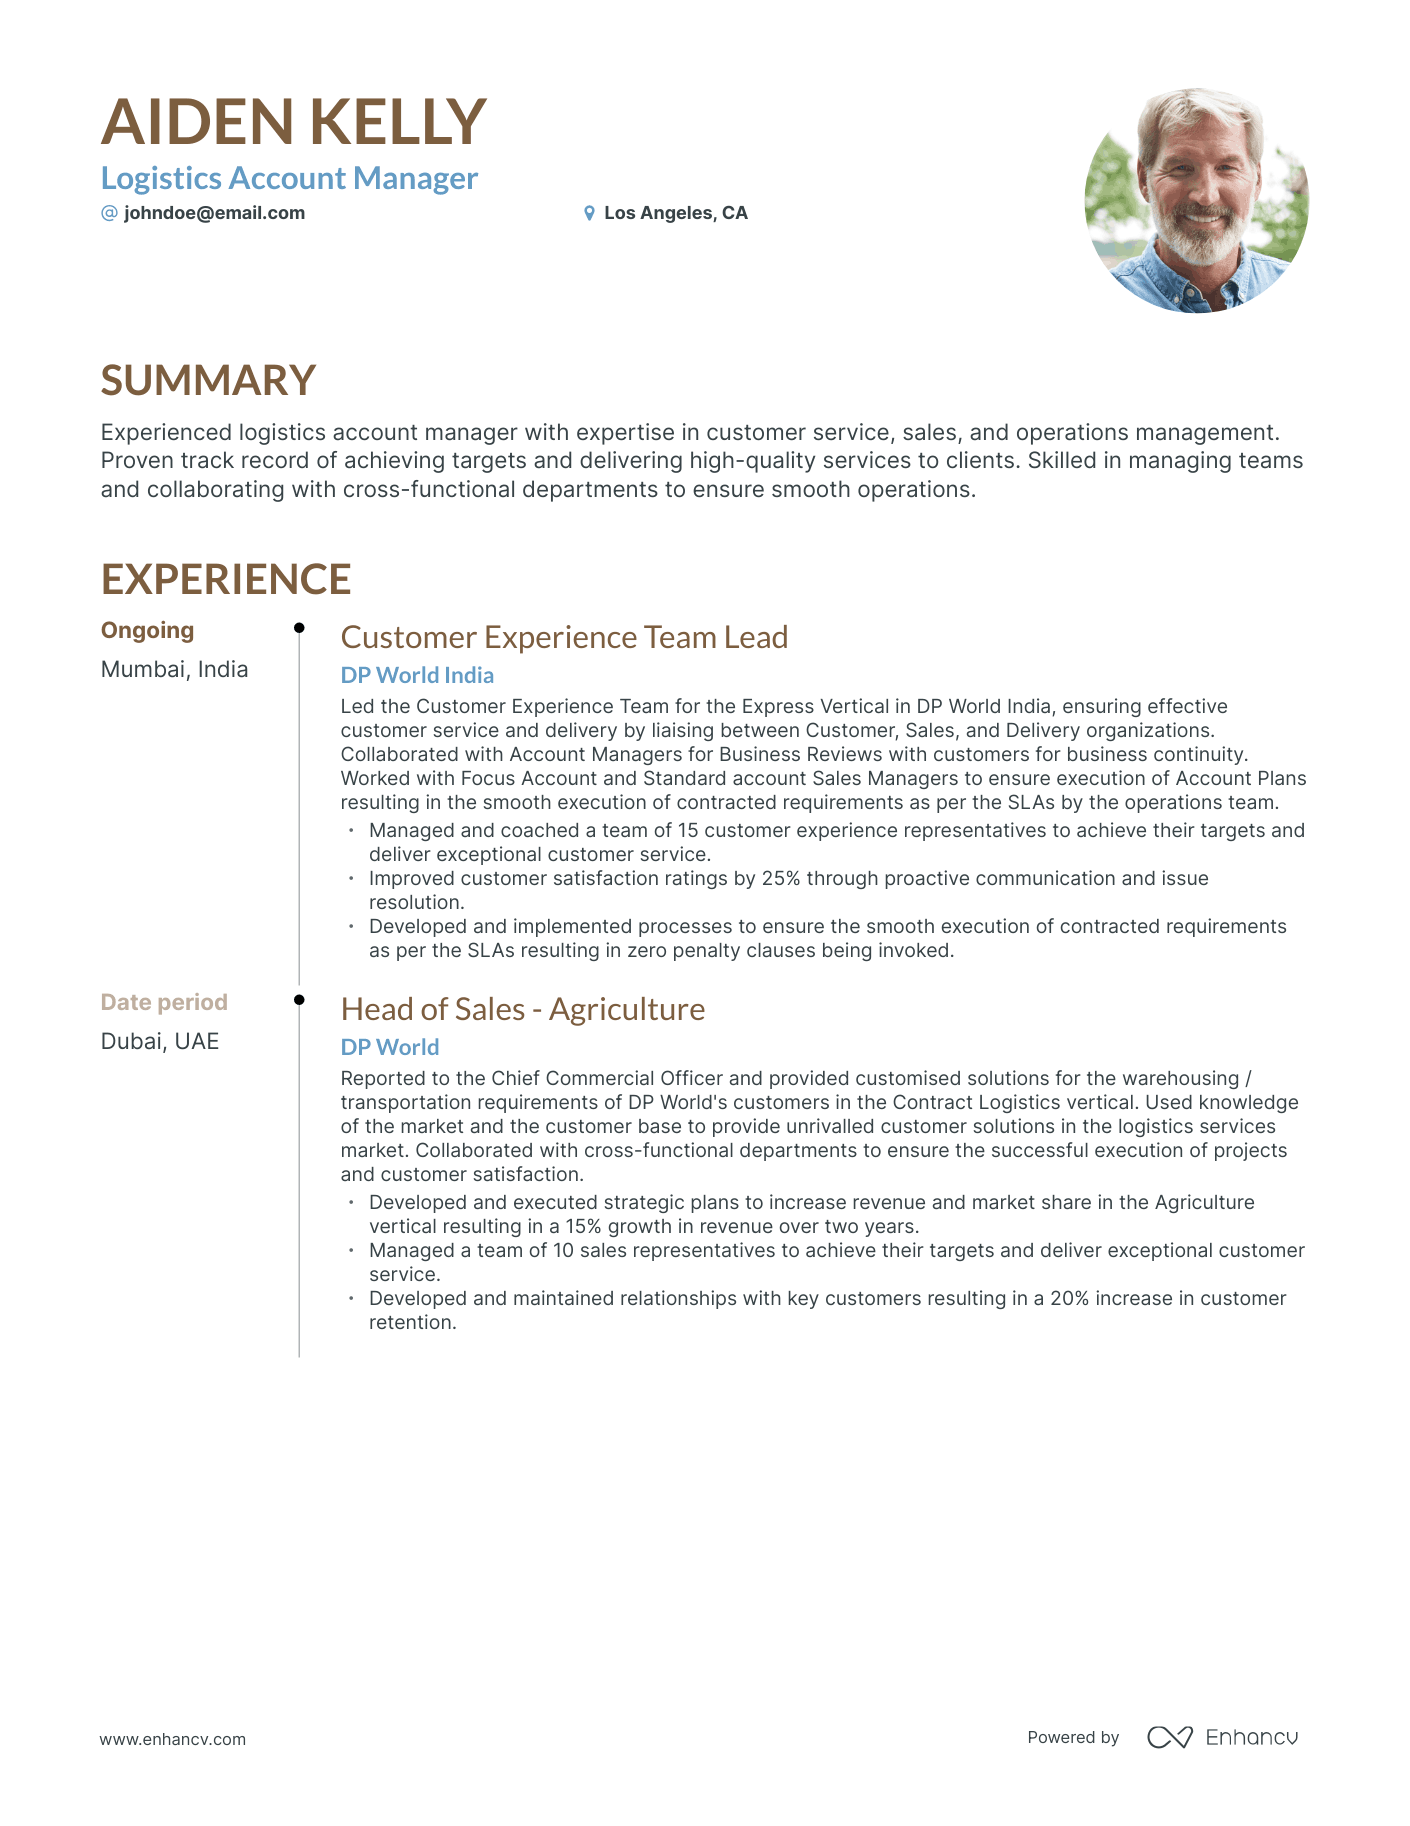 Timeline Logistics Account Manager Resume Template